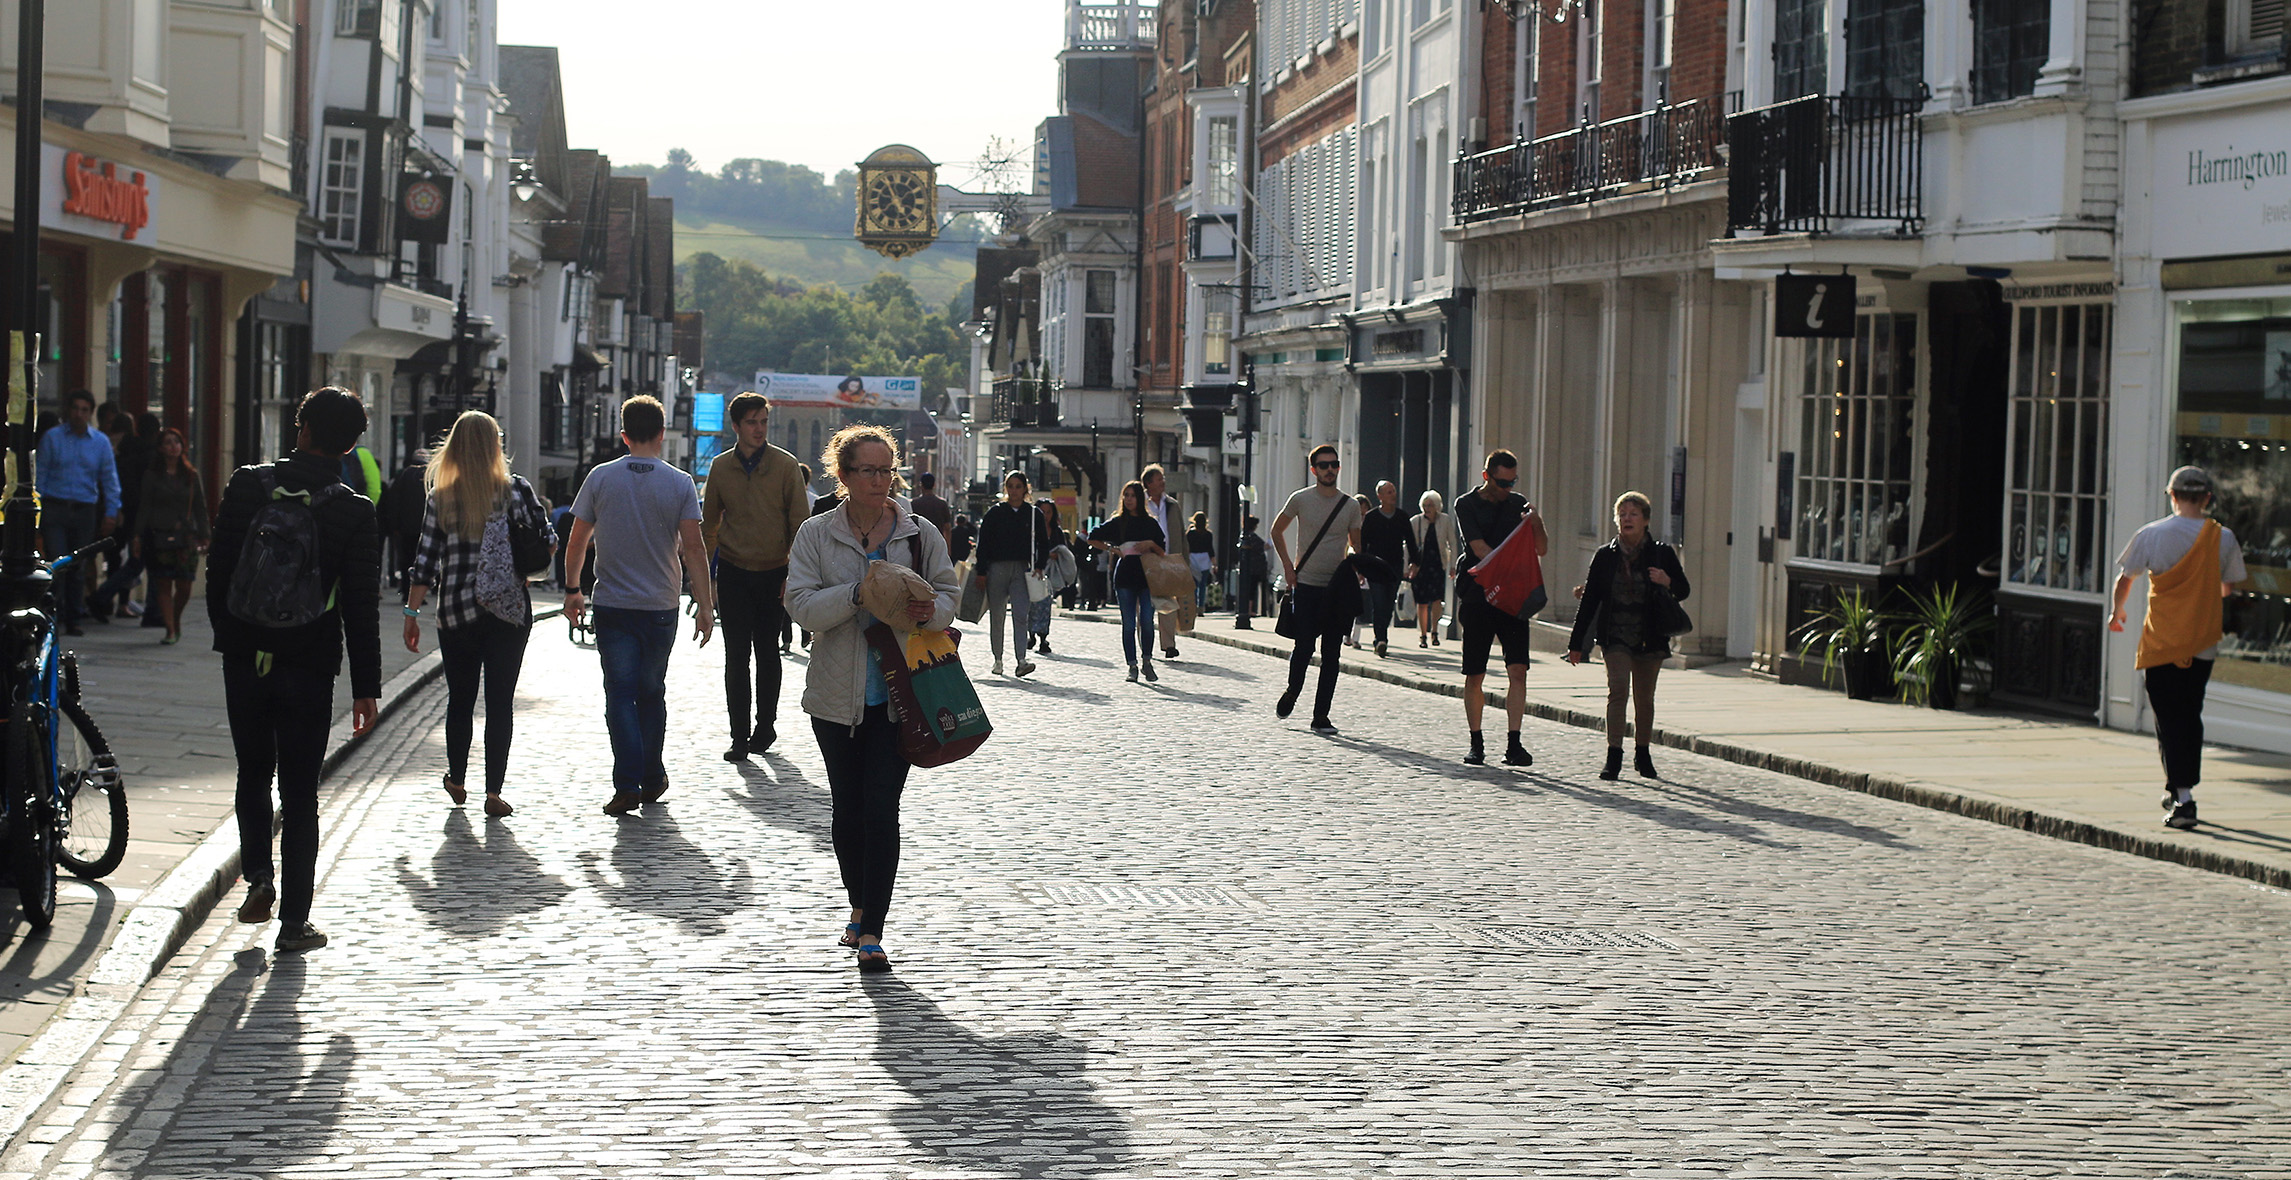 Guildford high street on a busy and sunny day. Pedestrians are walking both on the pavements and down the middle of the cobbled street.